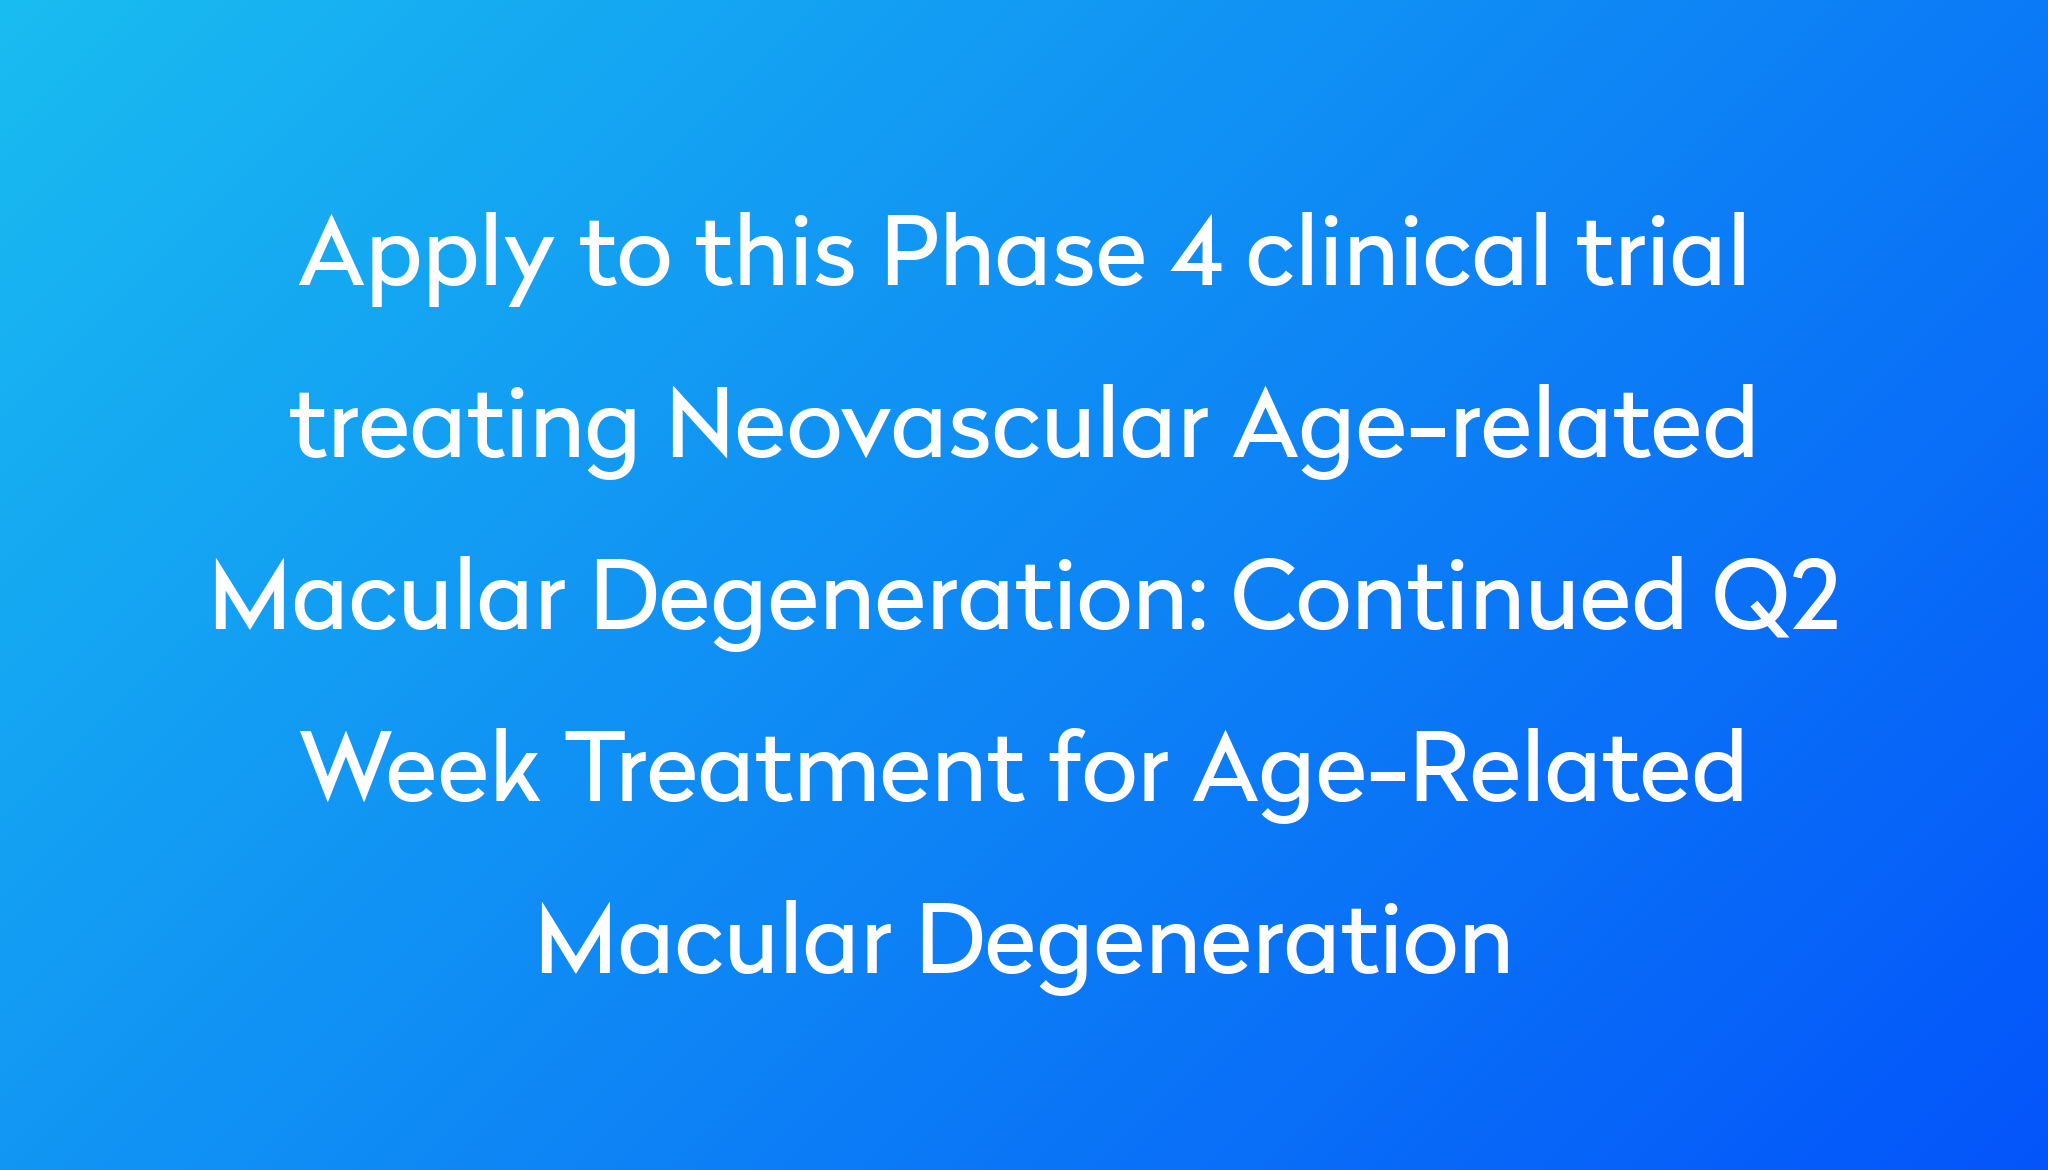 Continued Q2 Week Treatment for AgeRelated Macular Degeneration